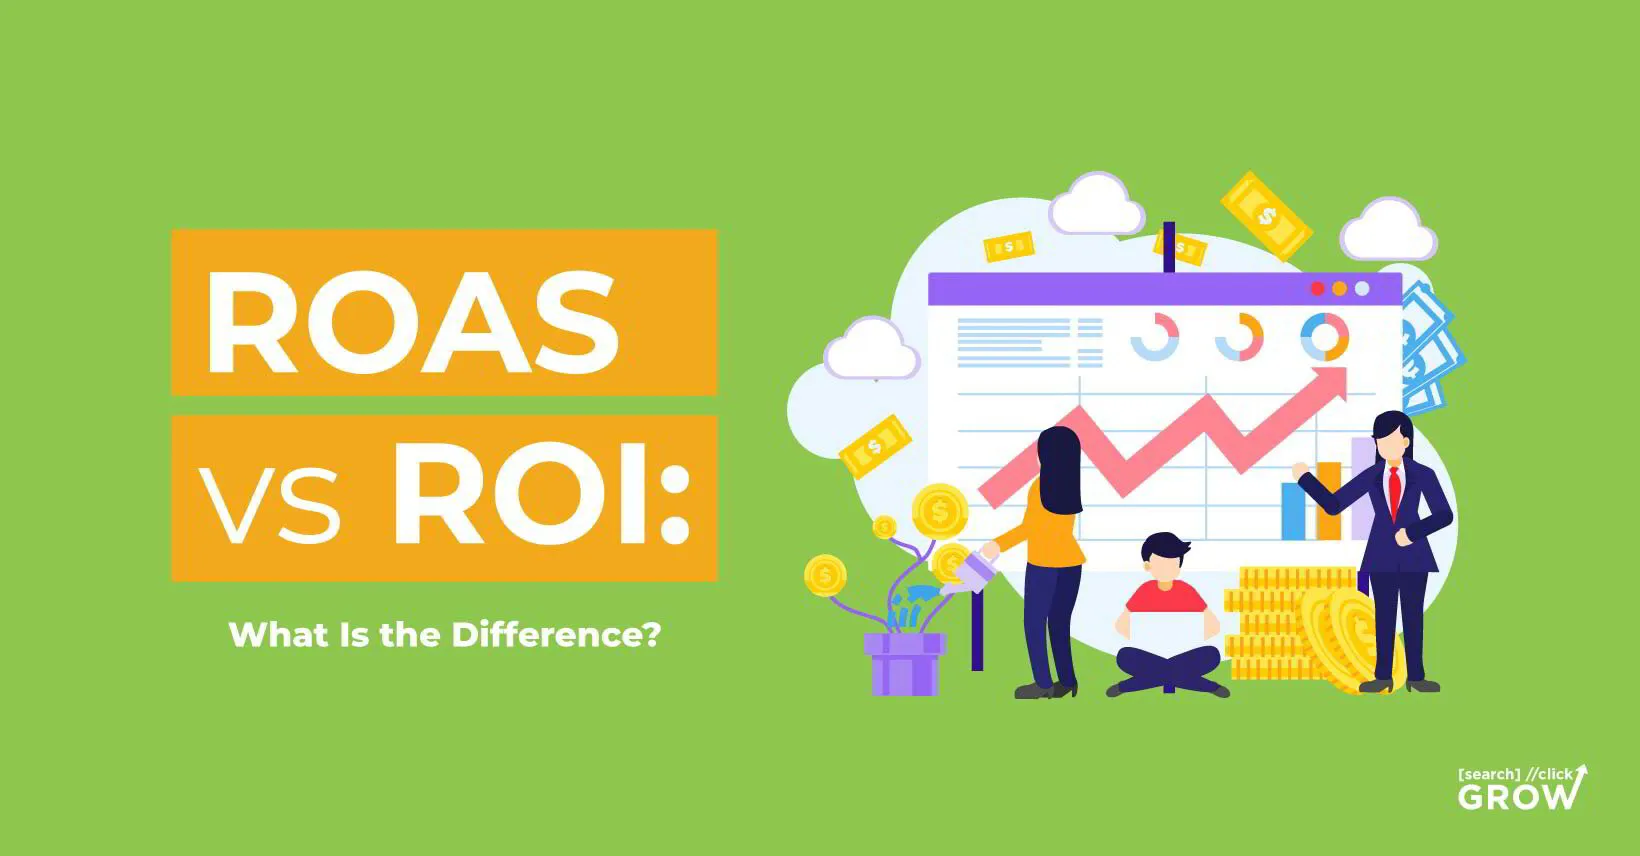 ROAS vs ROI: Understanding the Difference